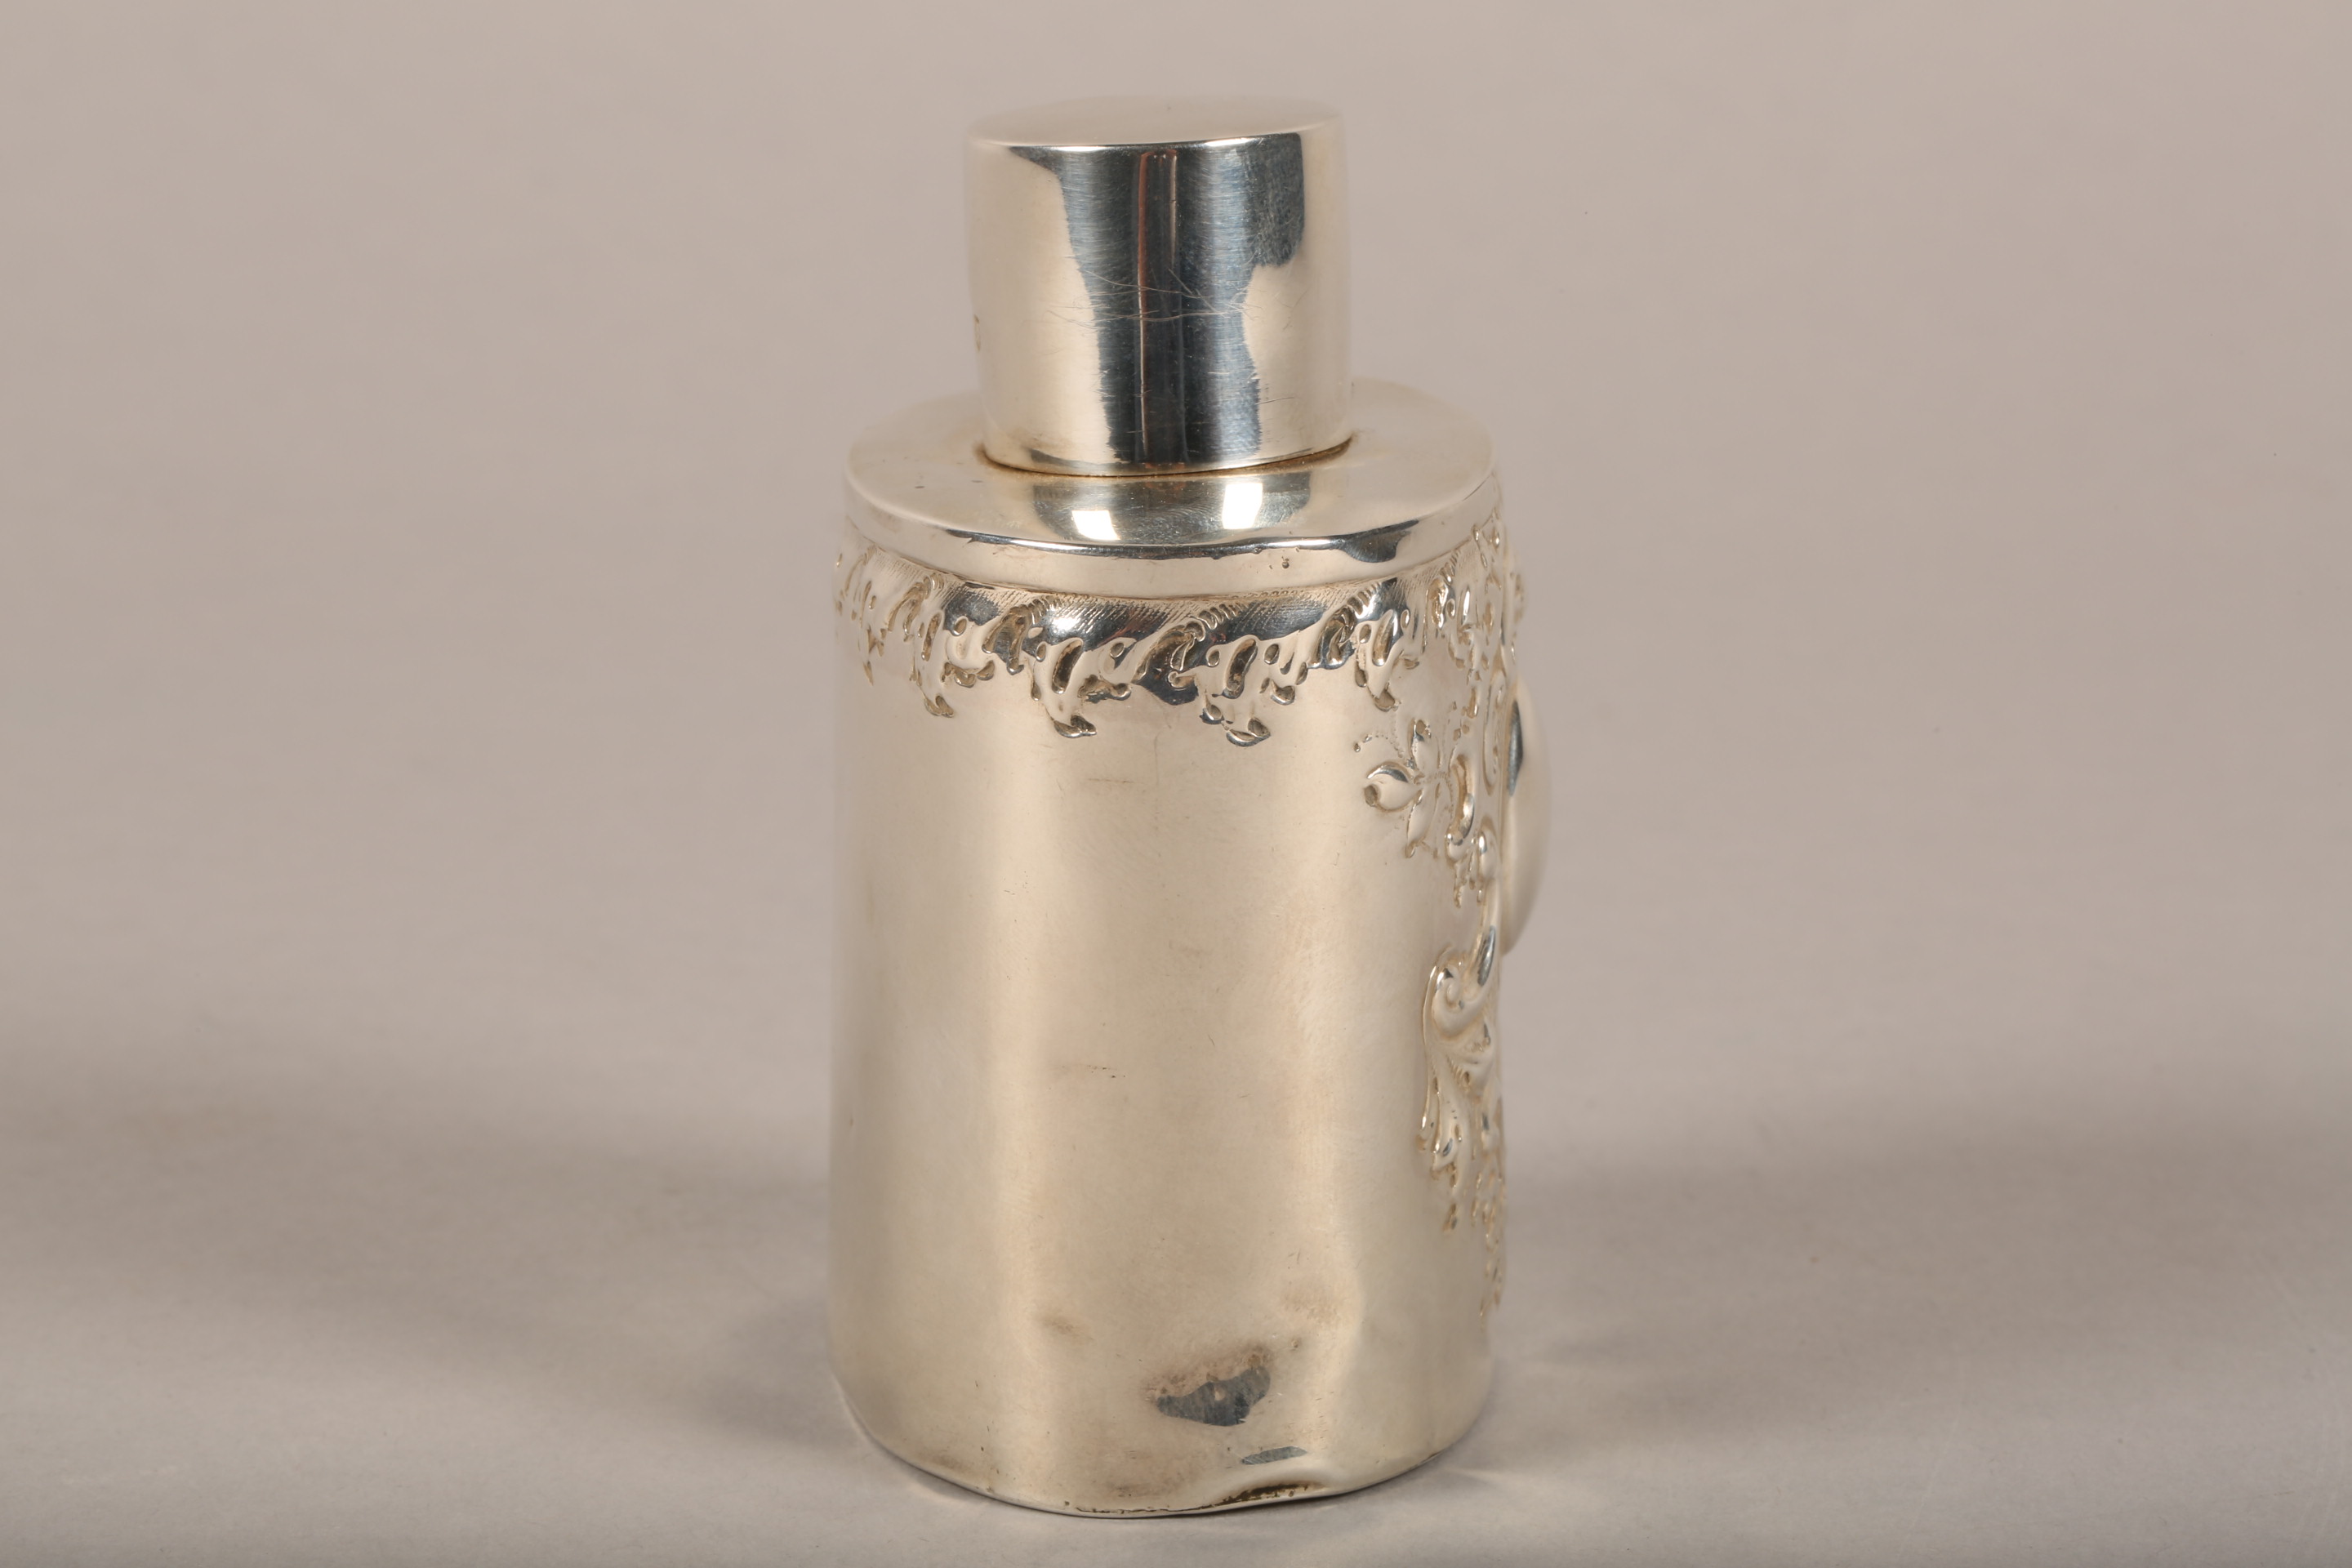 Victorian silver tea caddy, assay marked London 1897, weight 89g. - Image 6 of 8